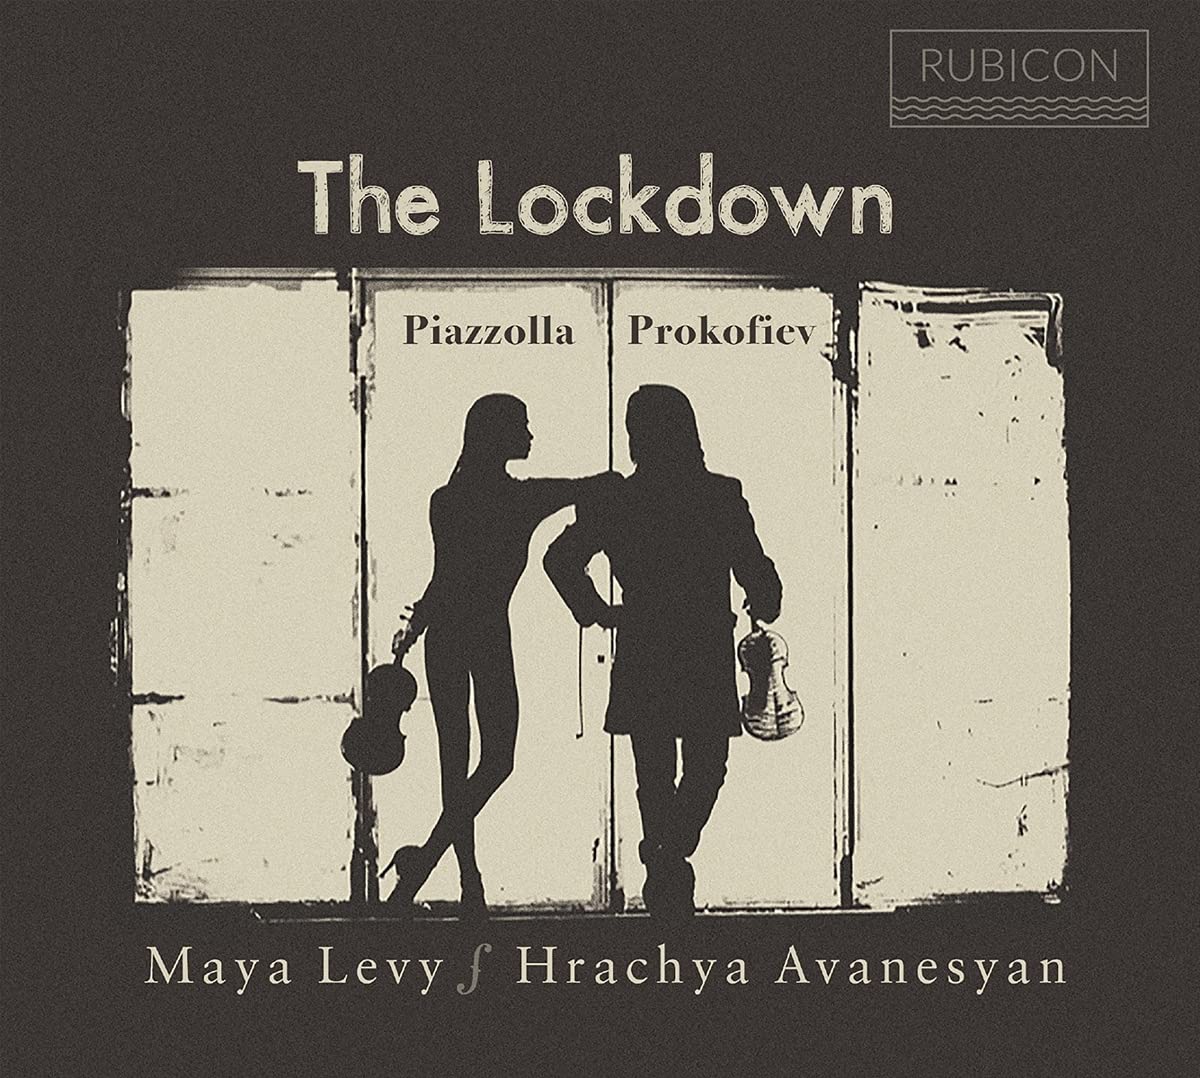 The cover of the album The Lockdown